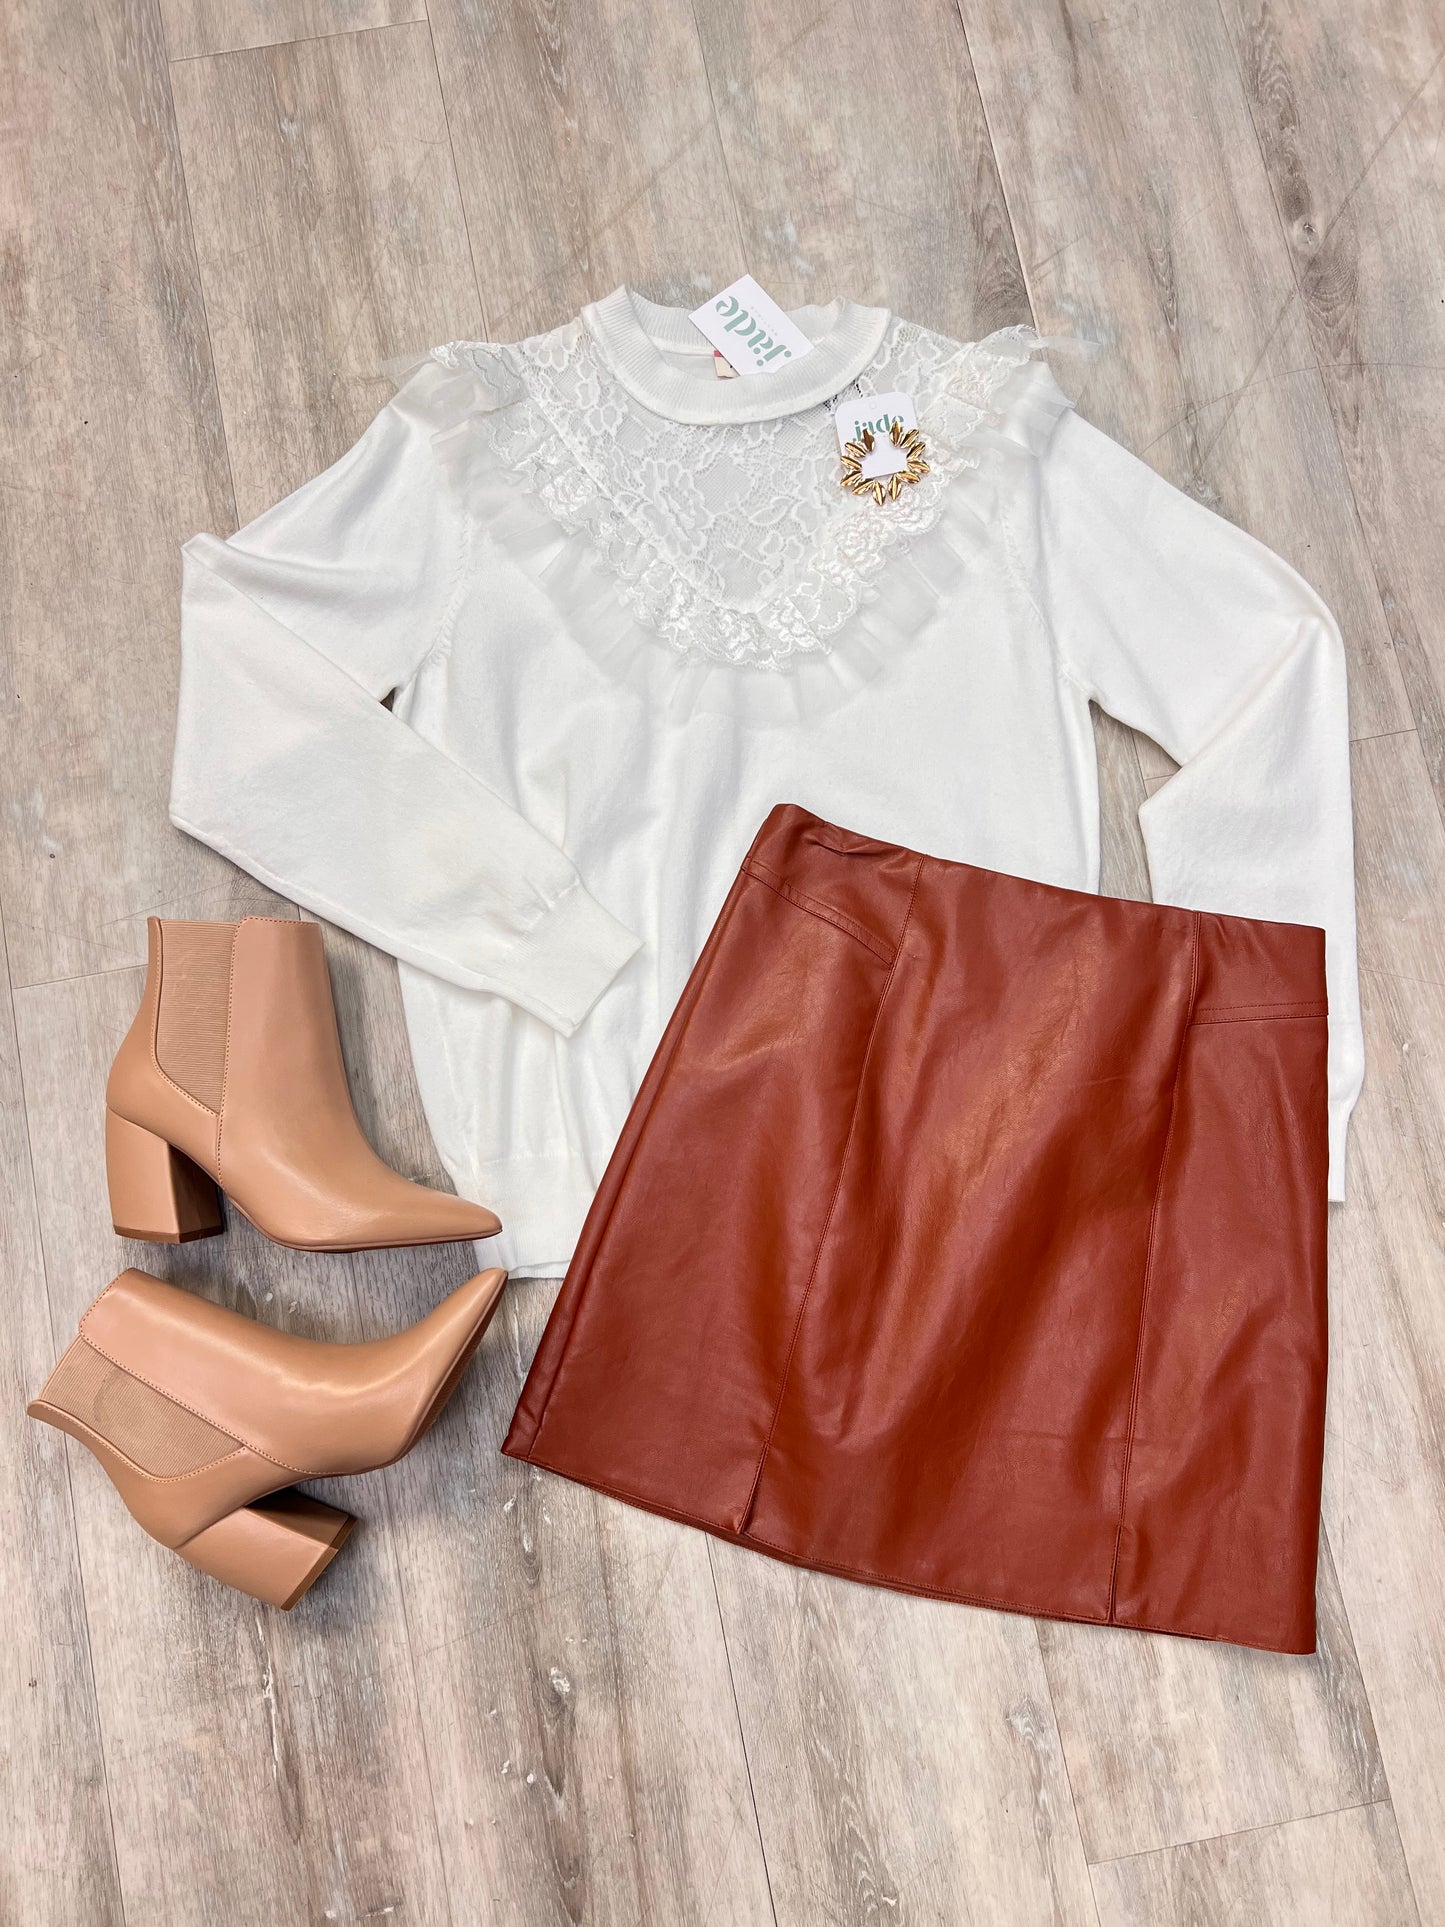 Rust Brown Leather Skirt